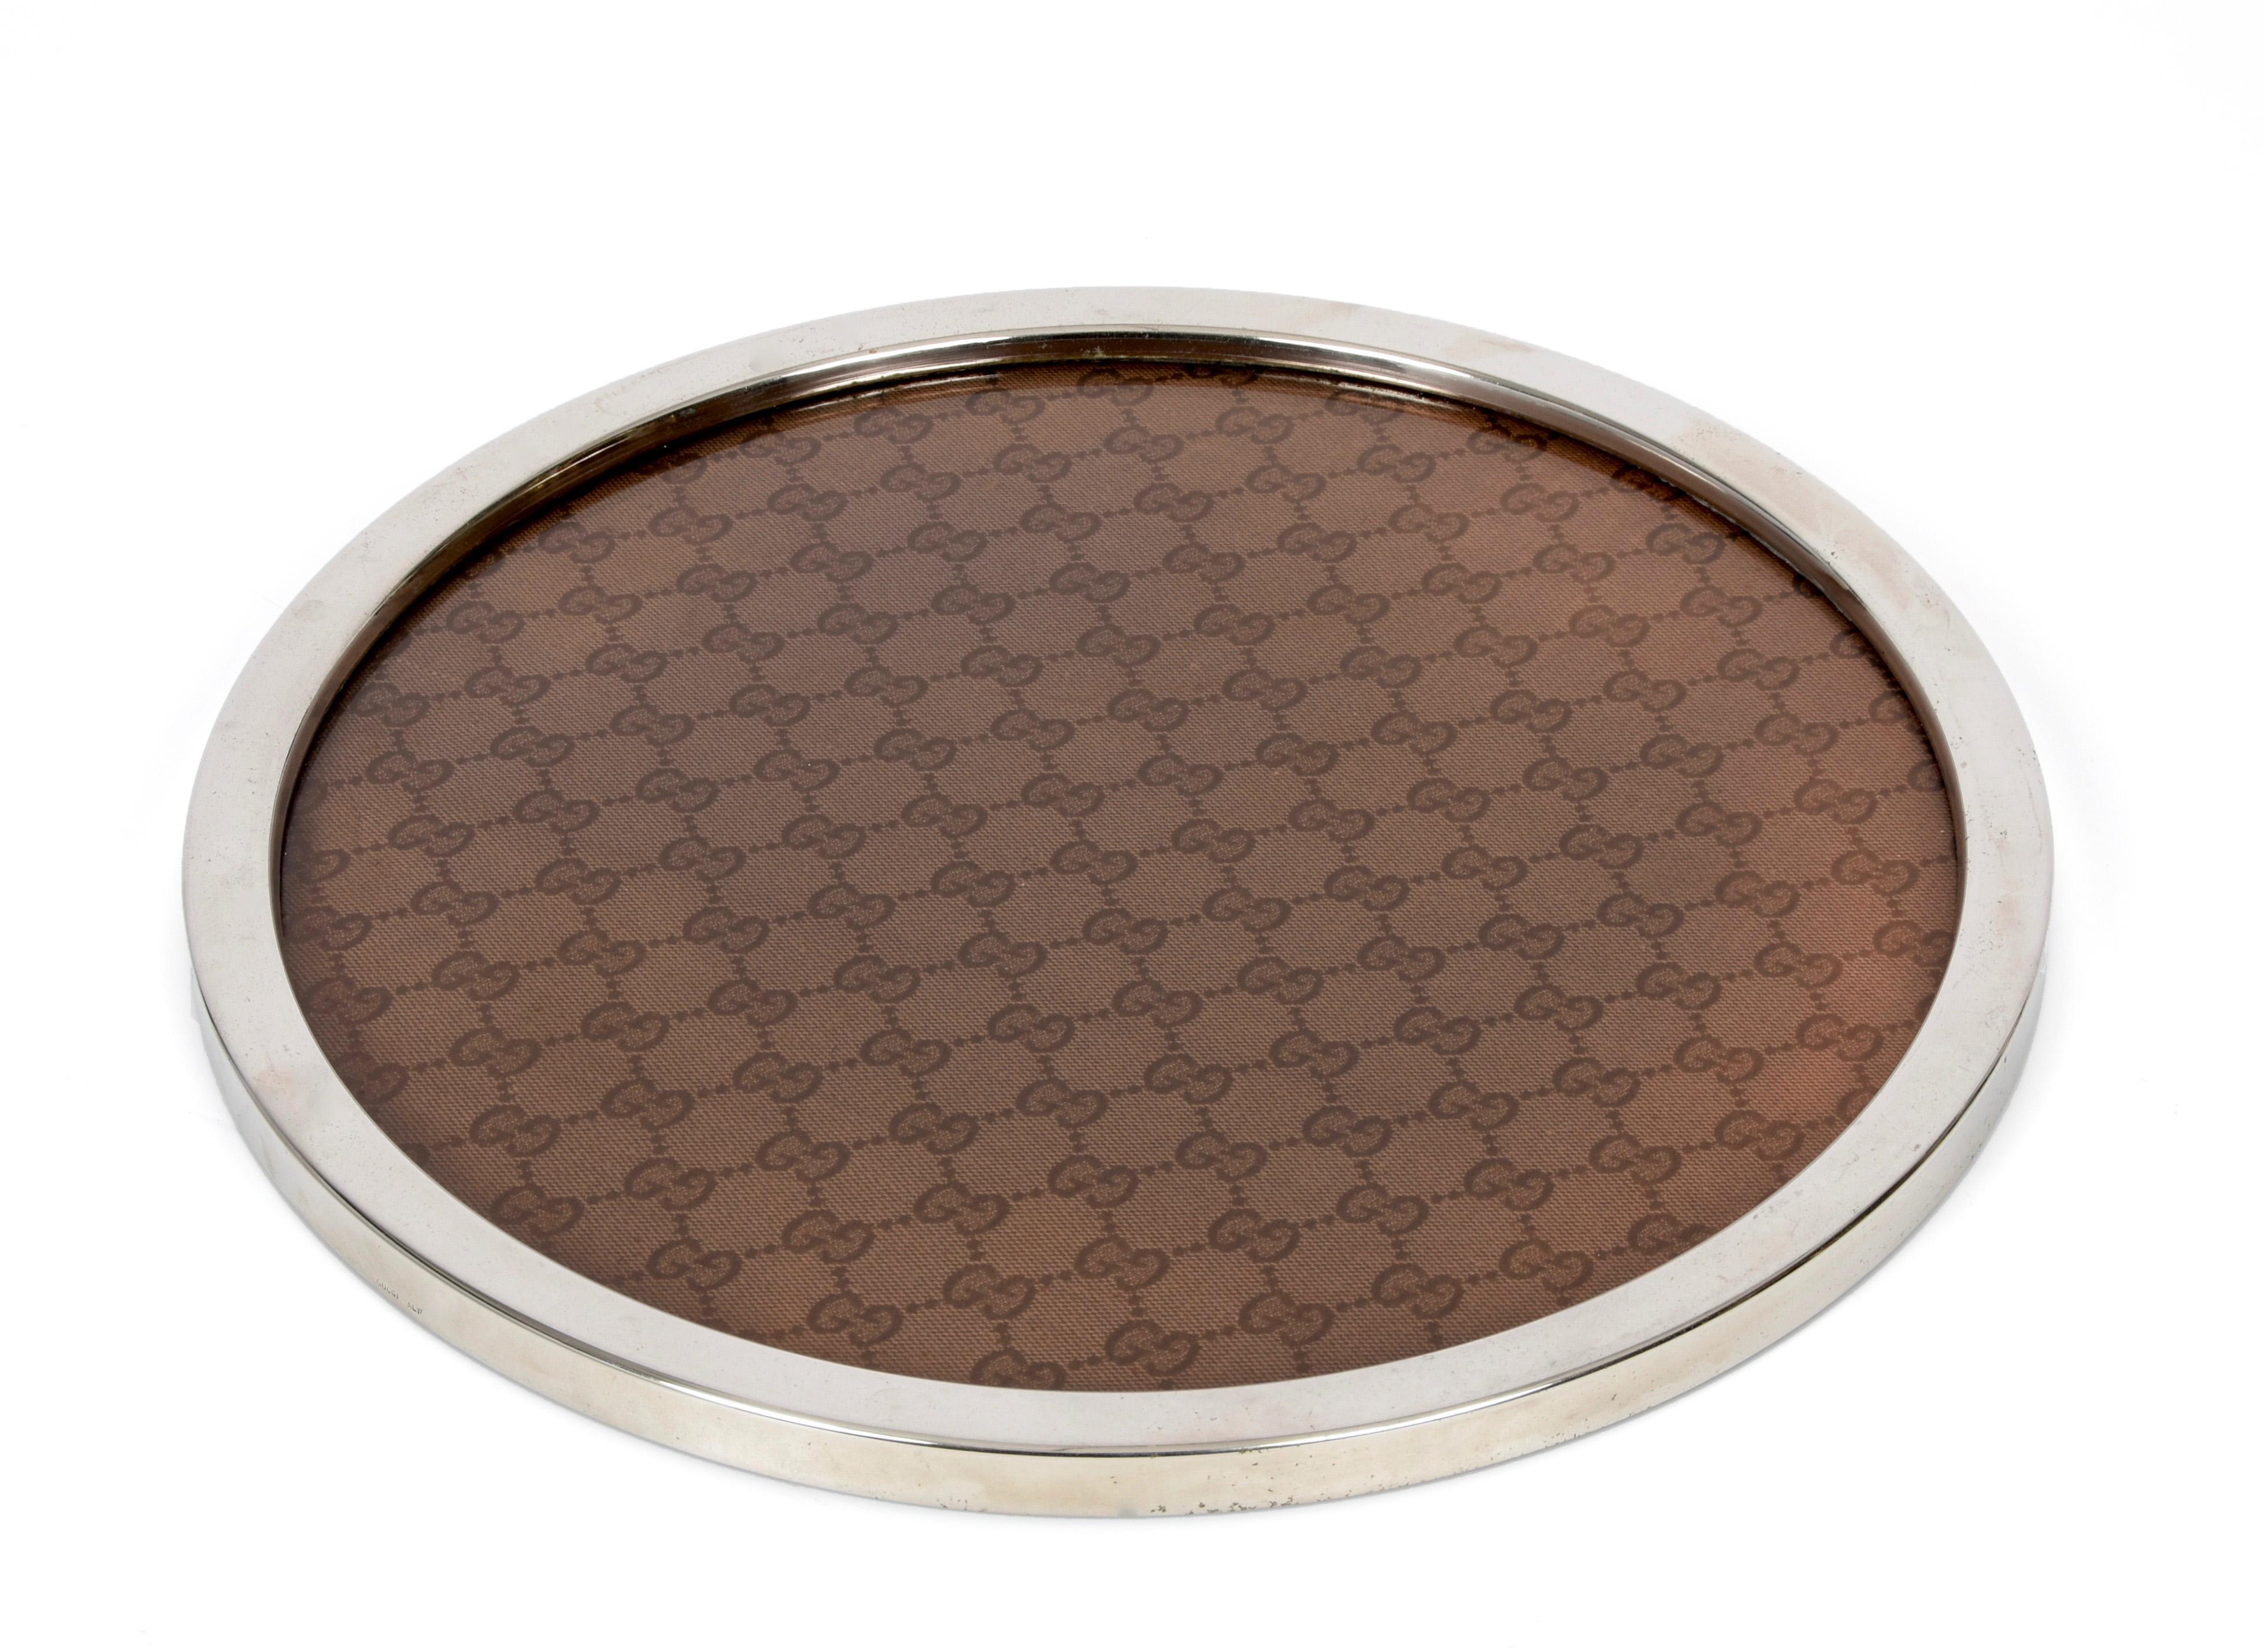 Iconic midcentury silvered metal, brown fabric and lucite tray. This astonishing piece was produced in Italy in 1969 by Gucci. 

The Gucci logo is clearly visible on the base of the tray and the words 